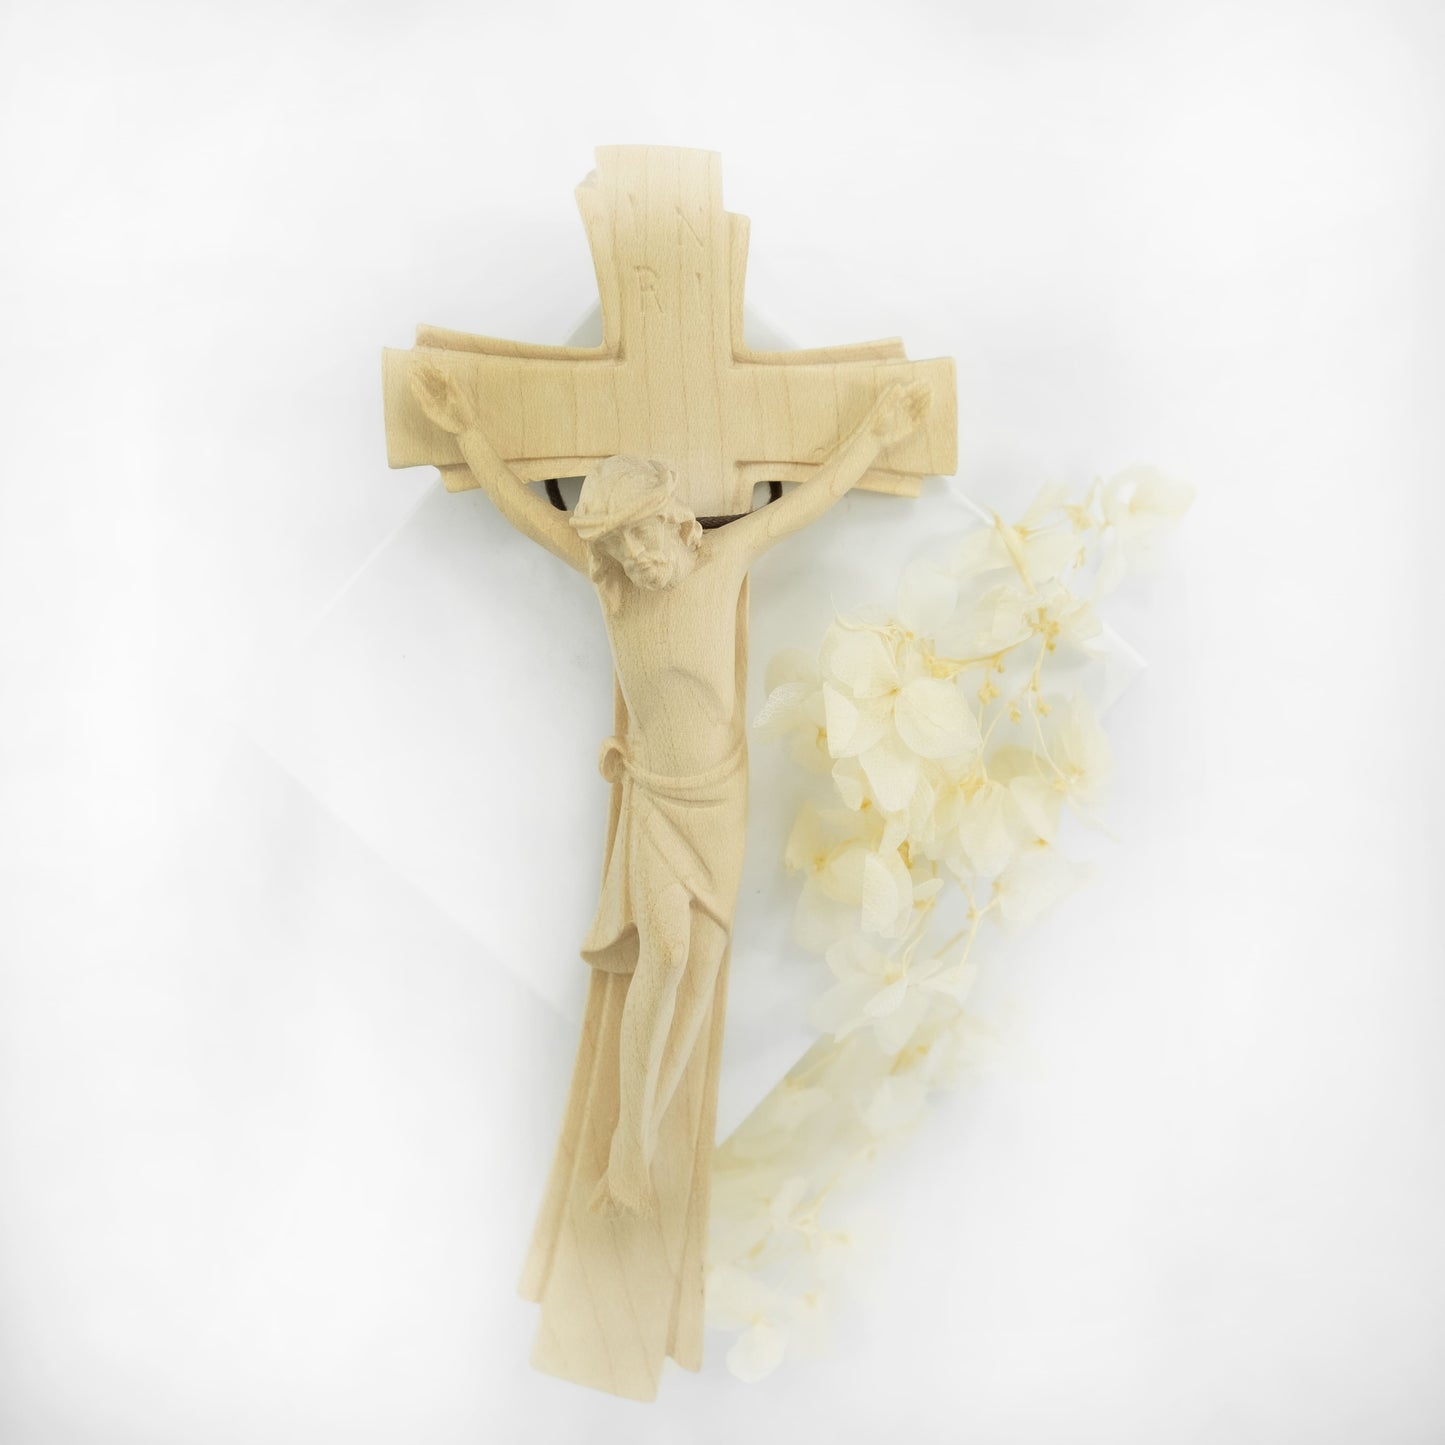 MONDO CATTOLICO 20 cm (7.87 in) Natural Wood Crucifix Modern Style